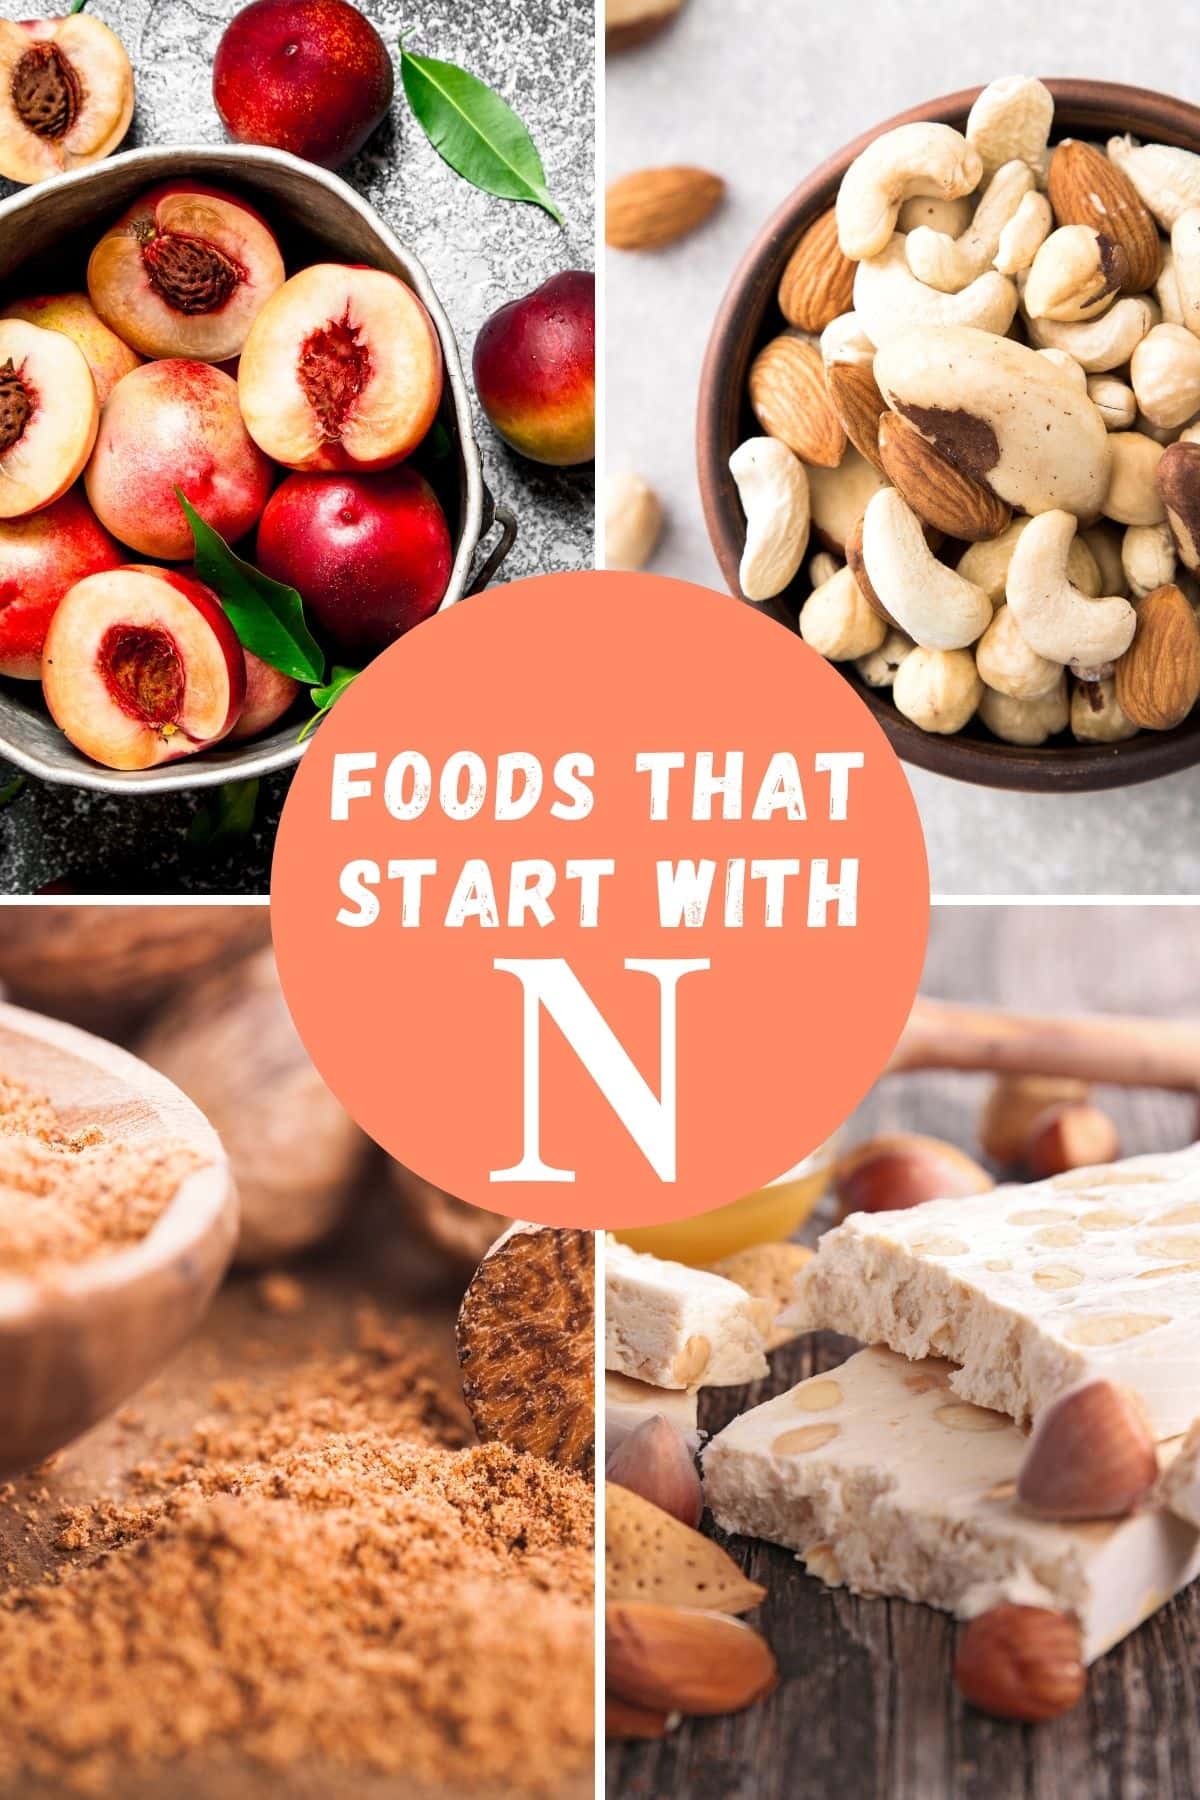 Foods that start with N